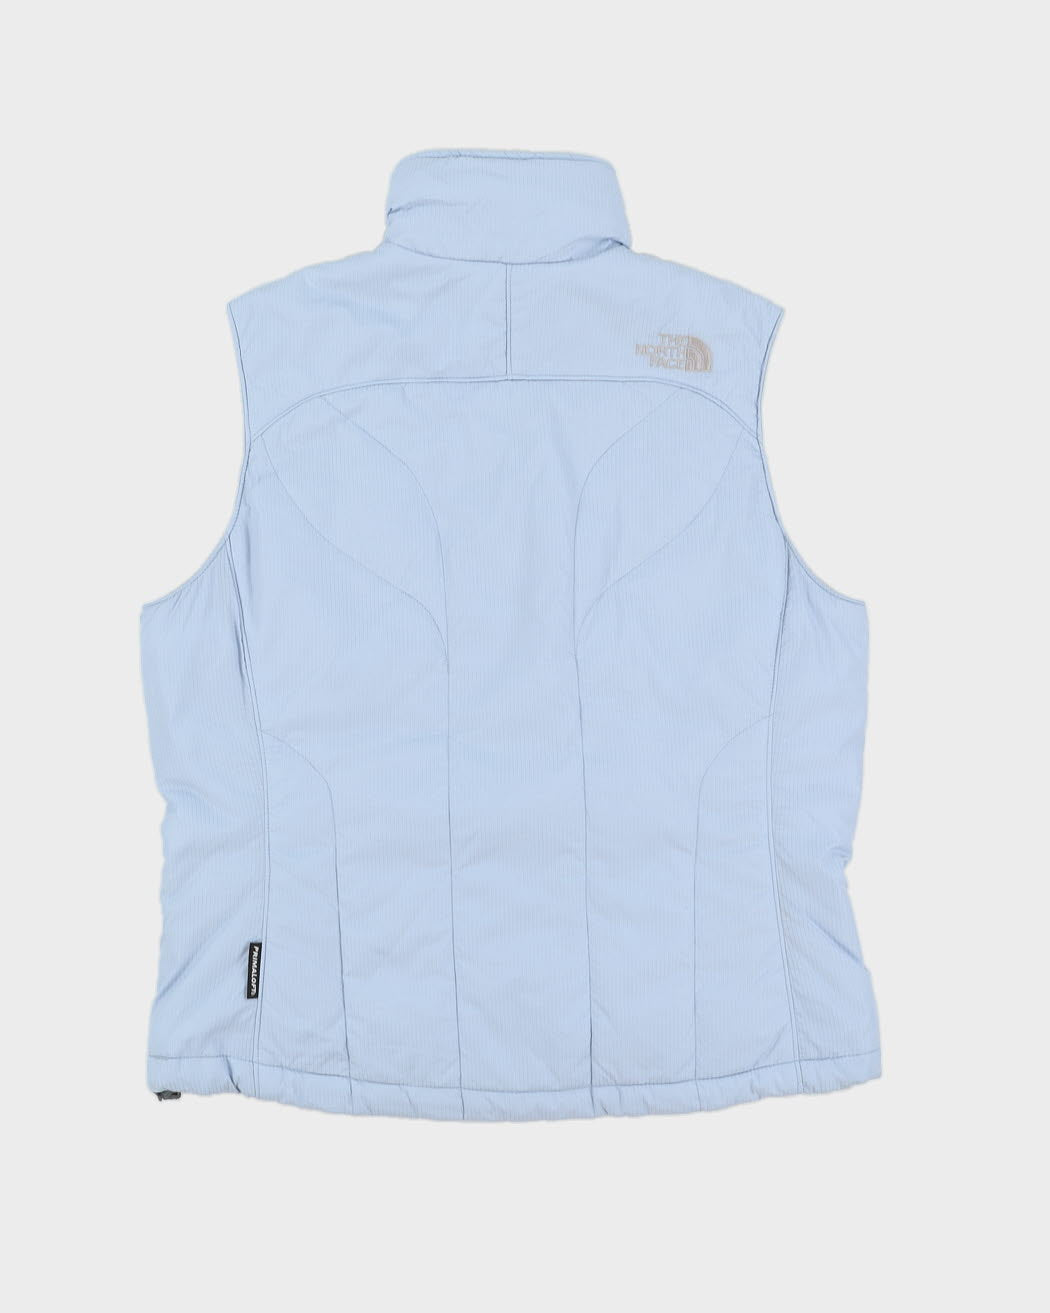 00s The North Face Blue Puffer Gilet - M